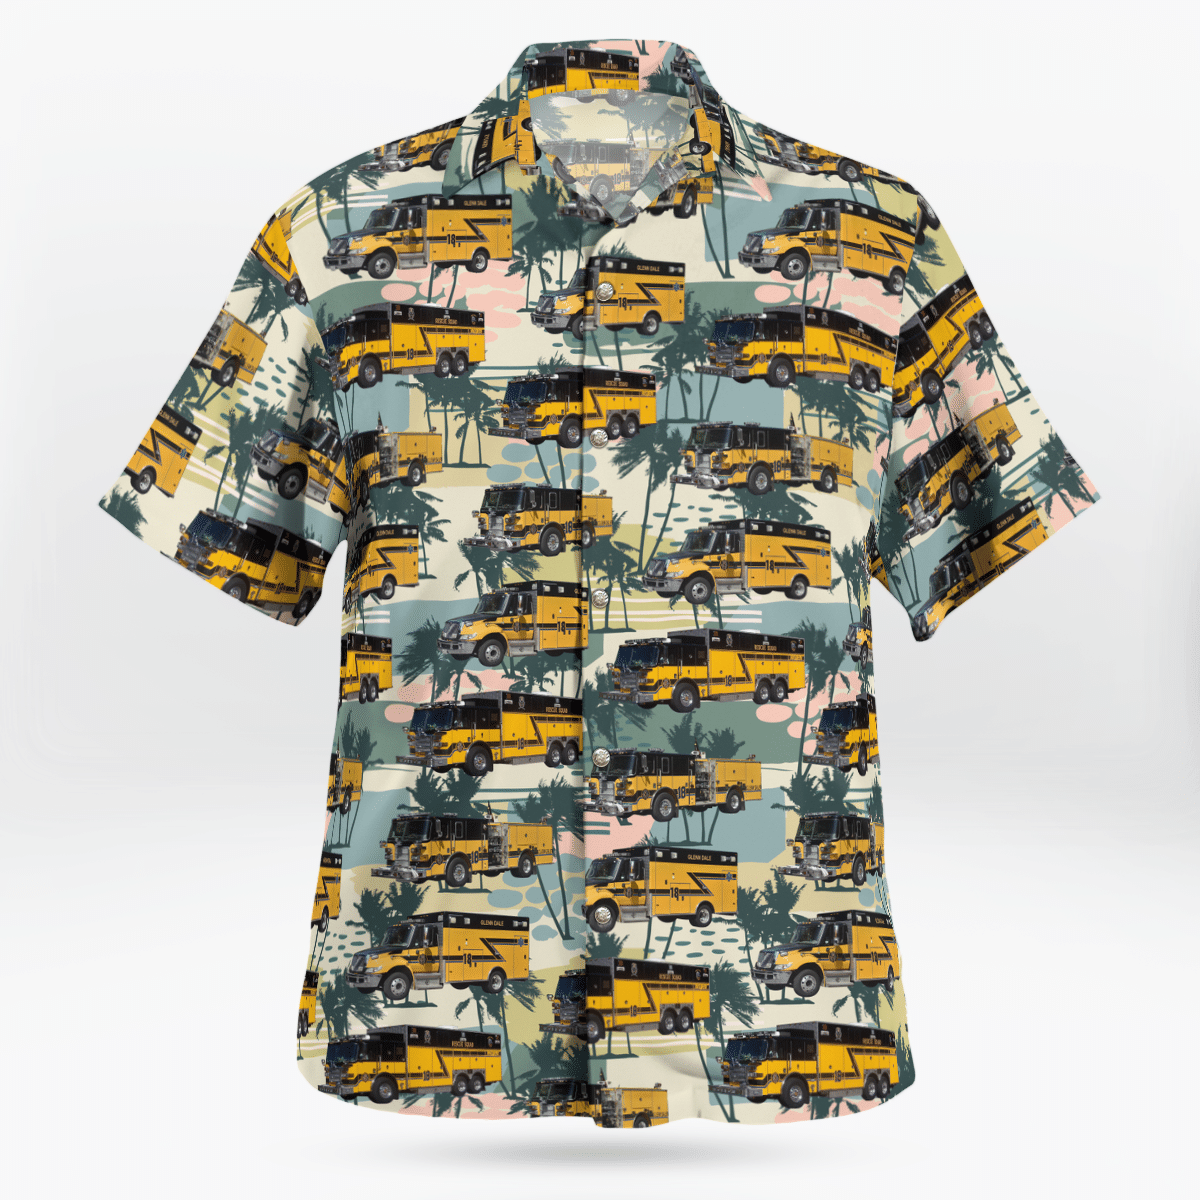 Hawaiian shirts never go out of style 19